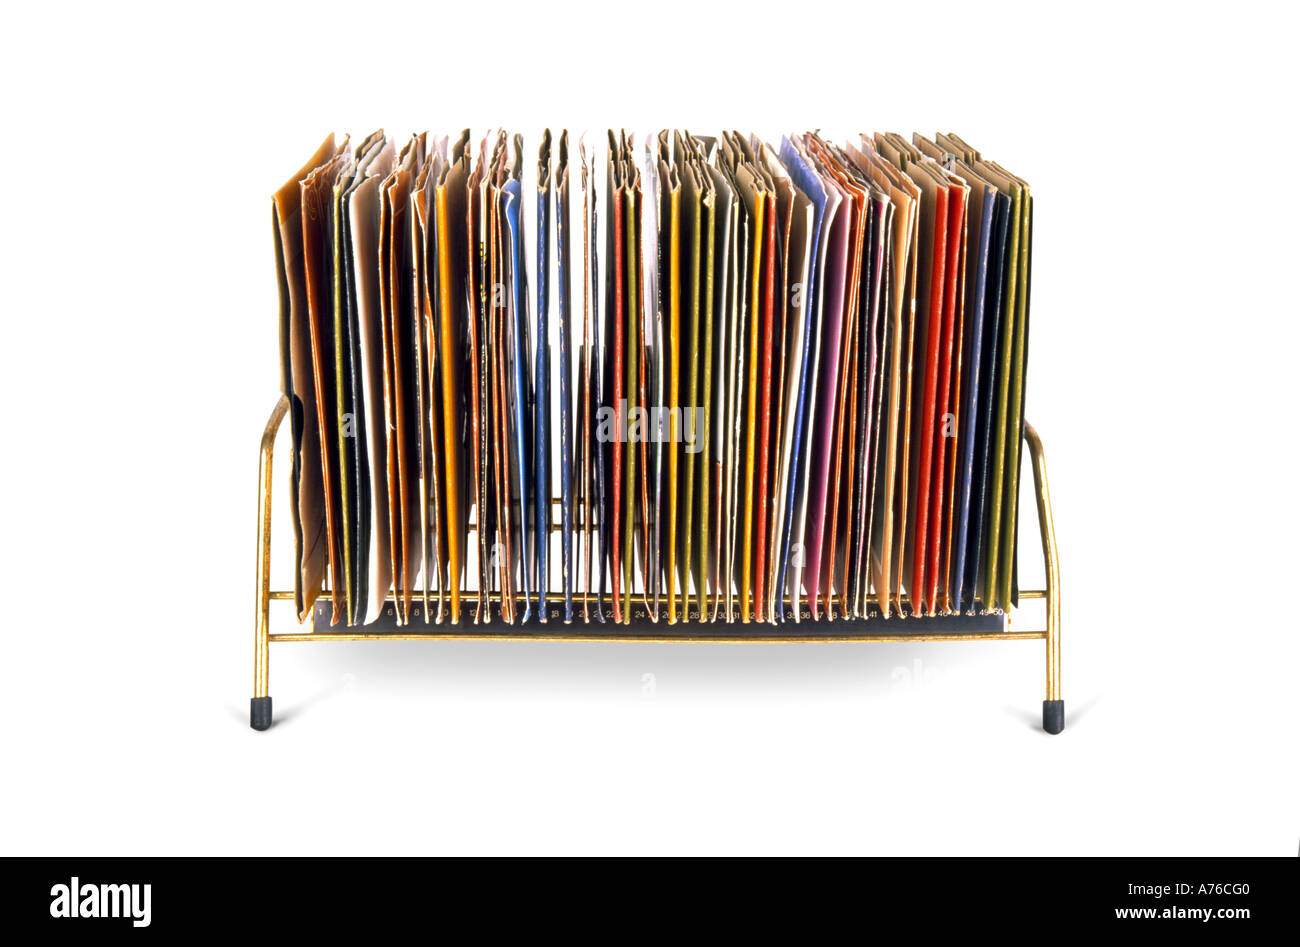 Side on view of old vinyl 45's records stacked in a kitsch seventies holder on a pure white background. Stock Photo